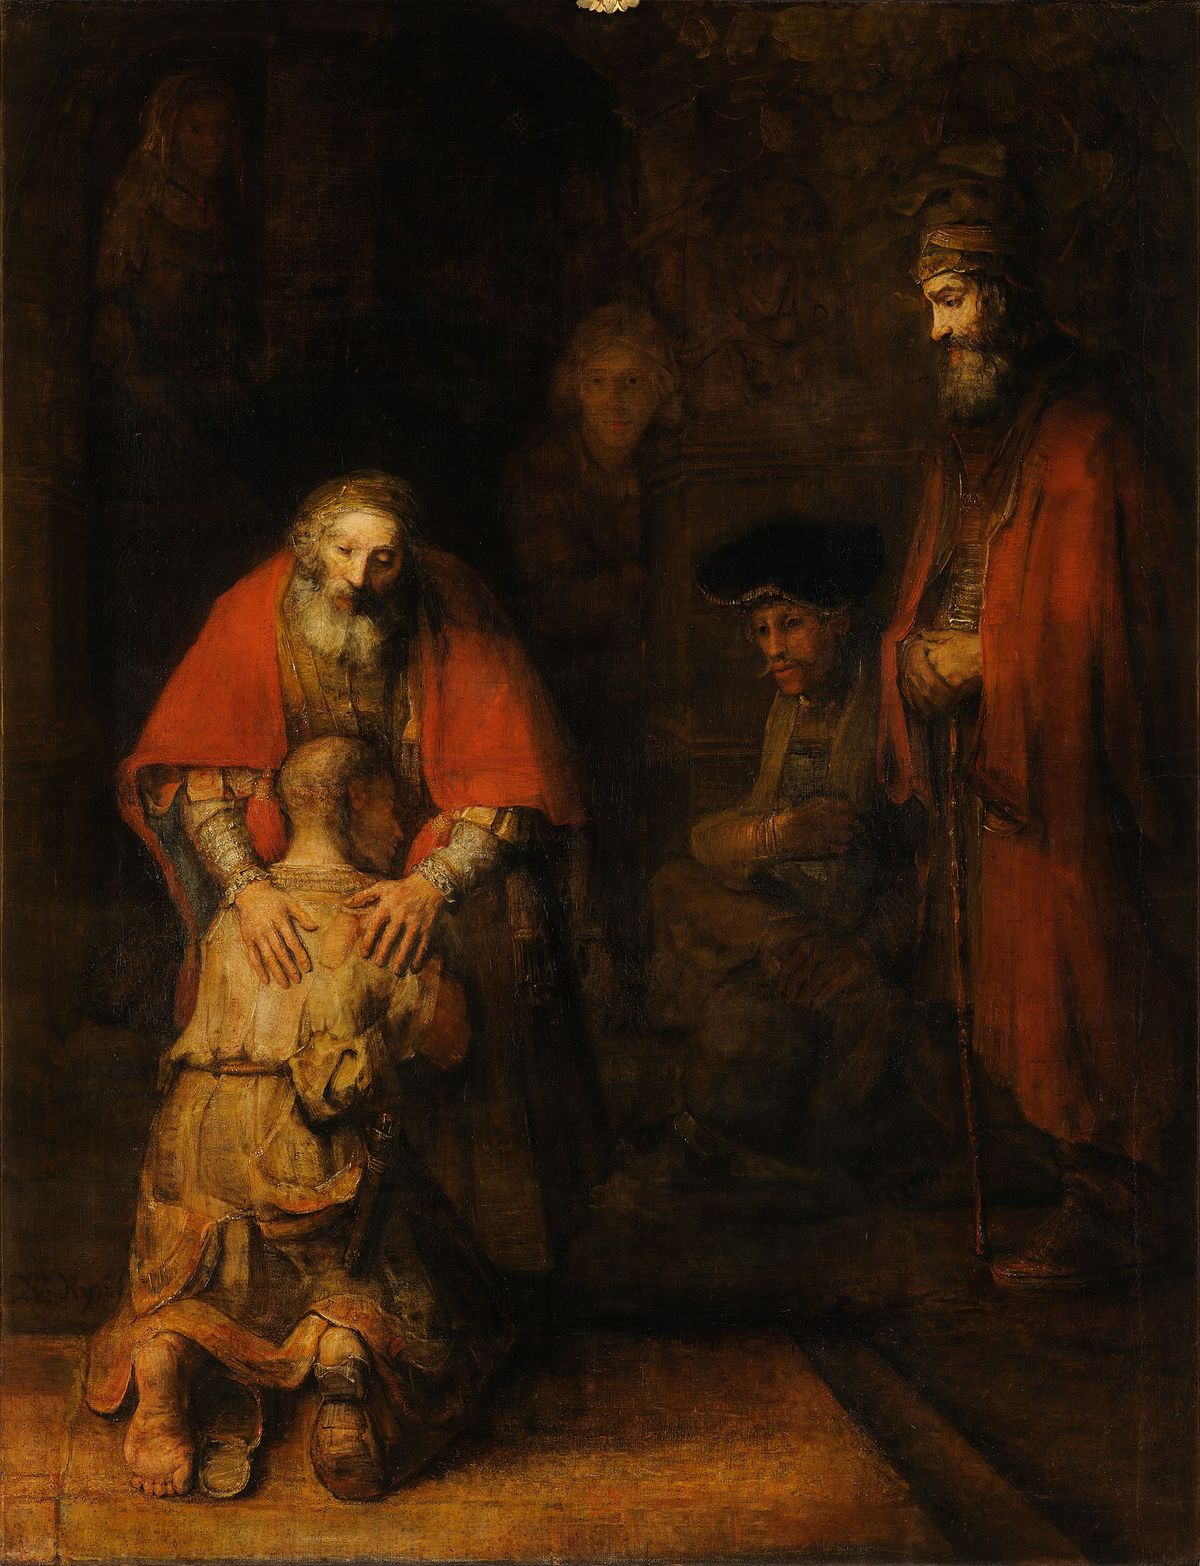 The Return of the Prodigal Son (1661-1669, Dutch) by Rembrandt - Public Domain Catholic Painting